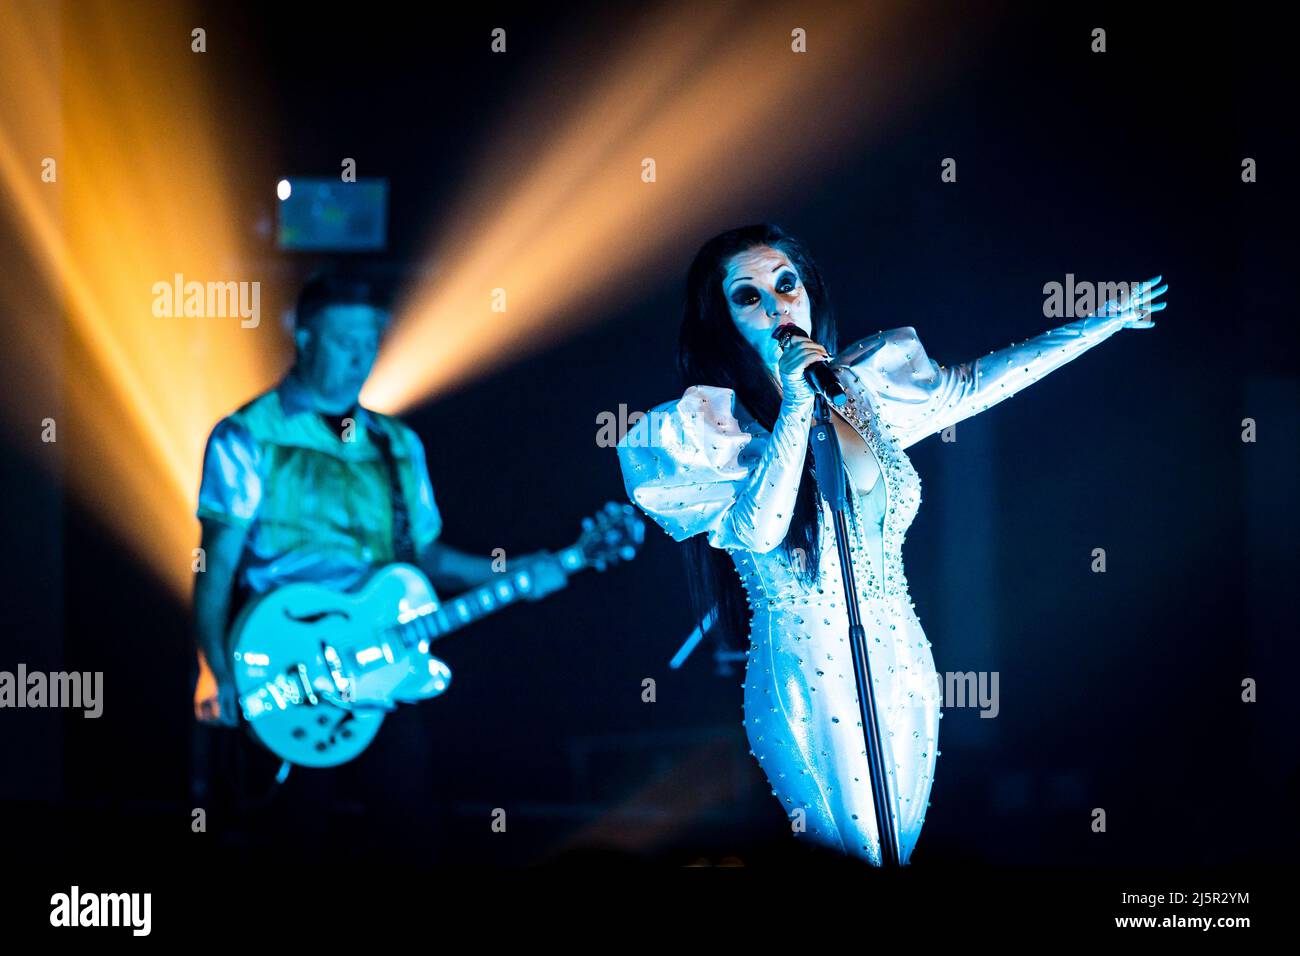 Alaska and Nacho Canut of Fangoria perform in concert at Sant Jordi Club on April 24, 2022 in Barcelona, Spain. (Photo by Silvia Isach) Stock Photo